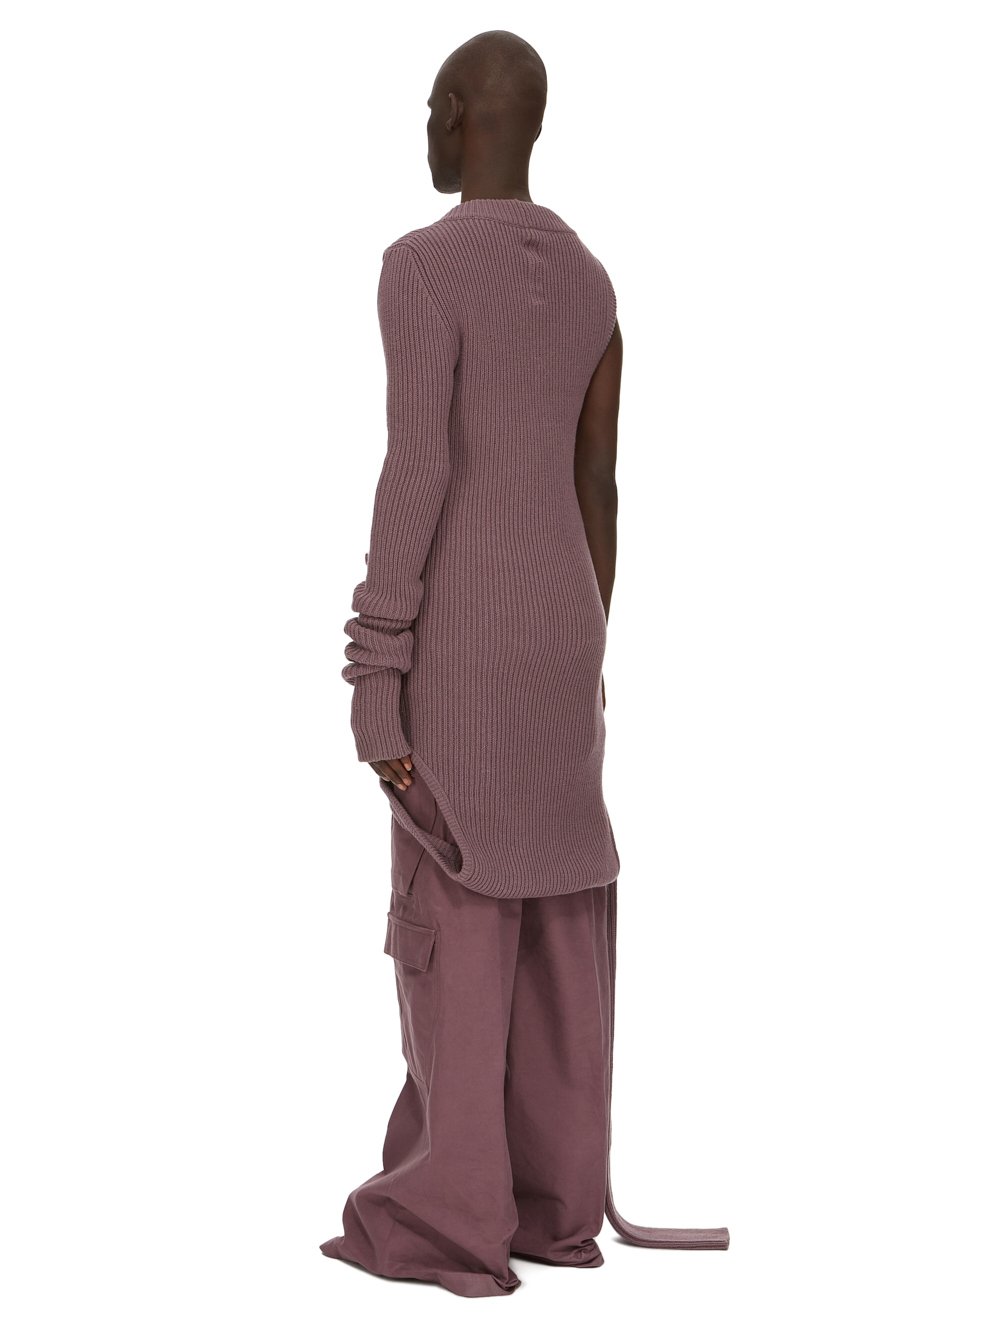 RICK OWENS FW23 LUXOR BANANA LS IN AMETHYST PURPLE RECYCLED CASHMERE KNIT